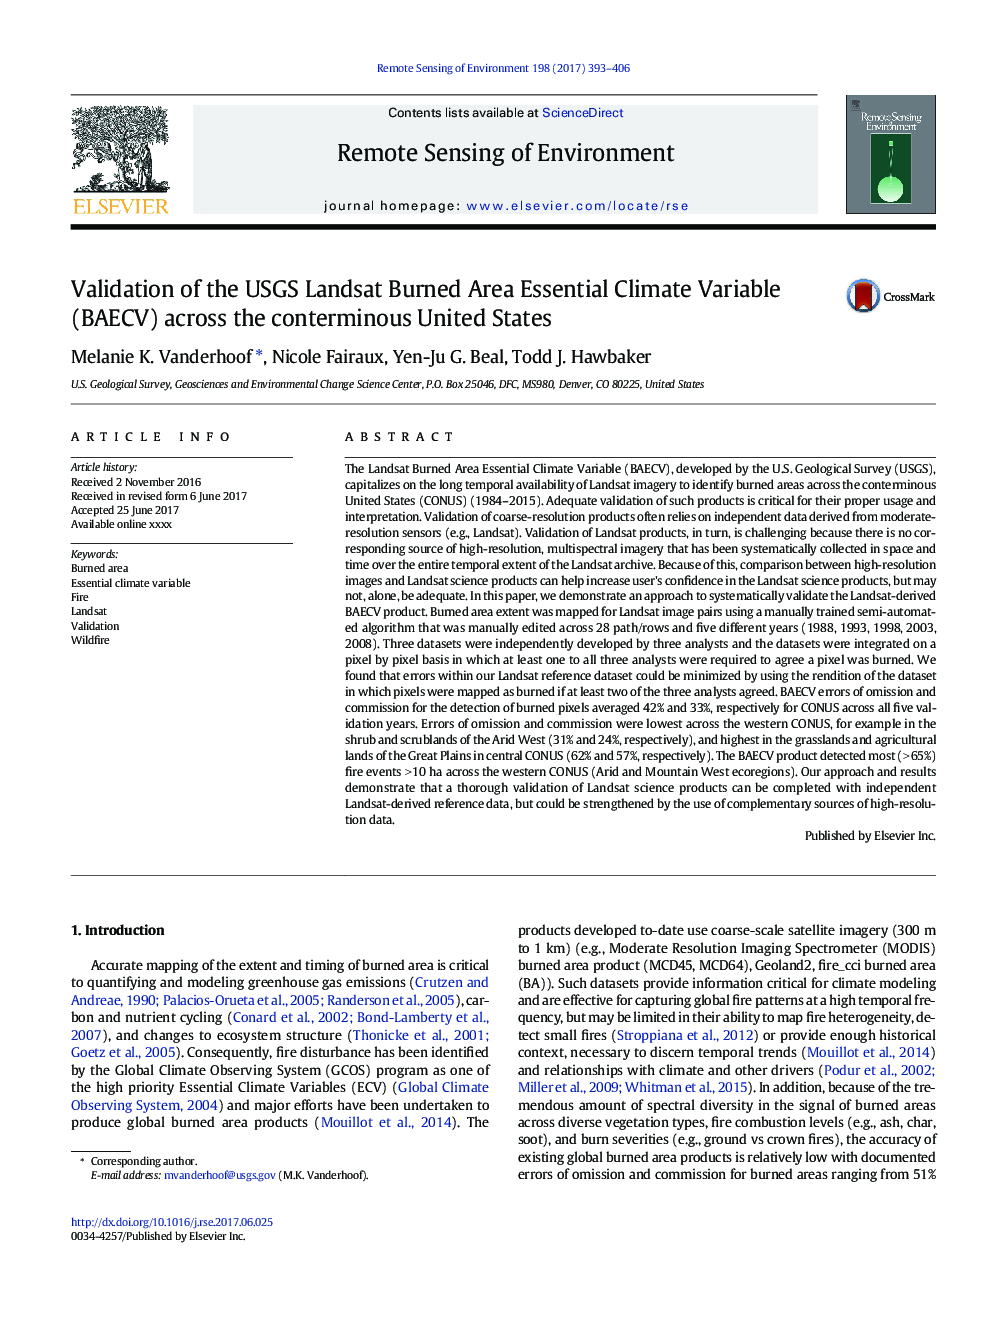 Validation of the USGS Landsat Burned Area Essential Climate Variable (BAECV) across the conterminous United States